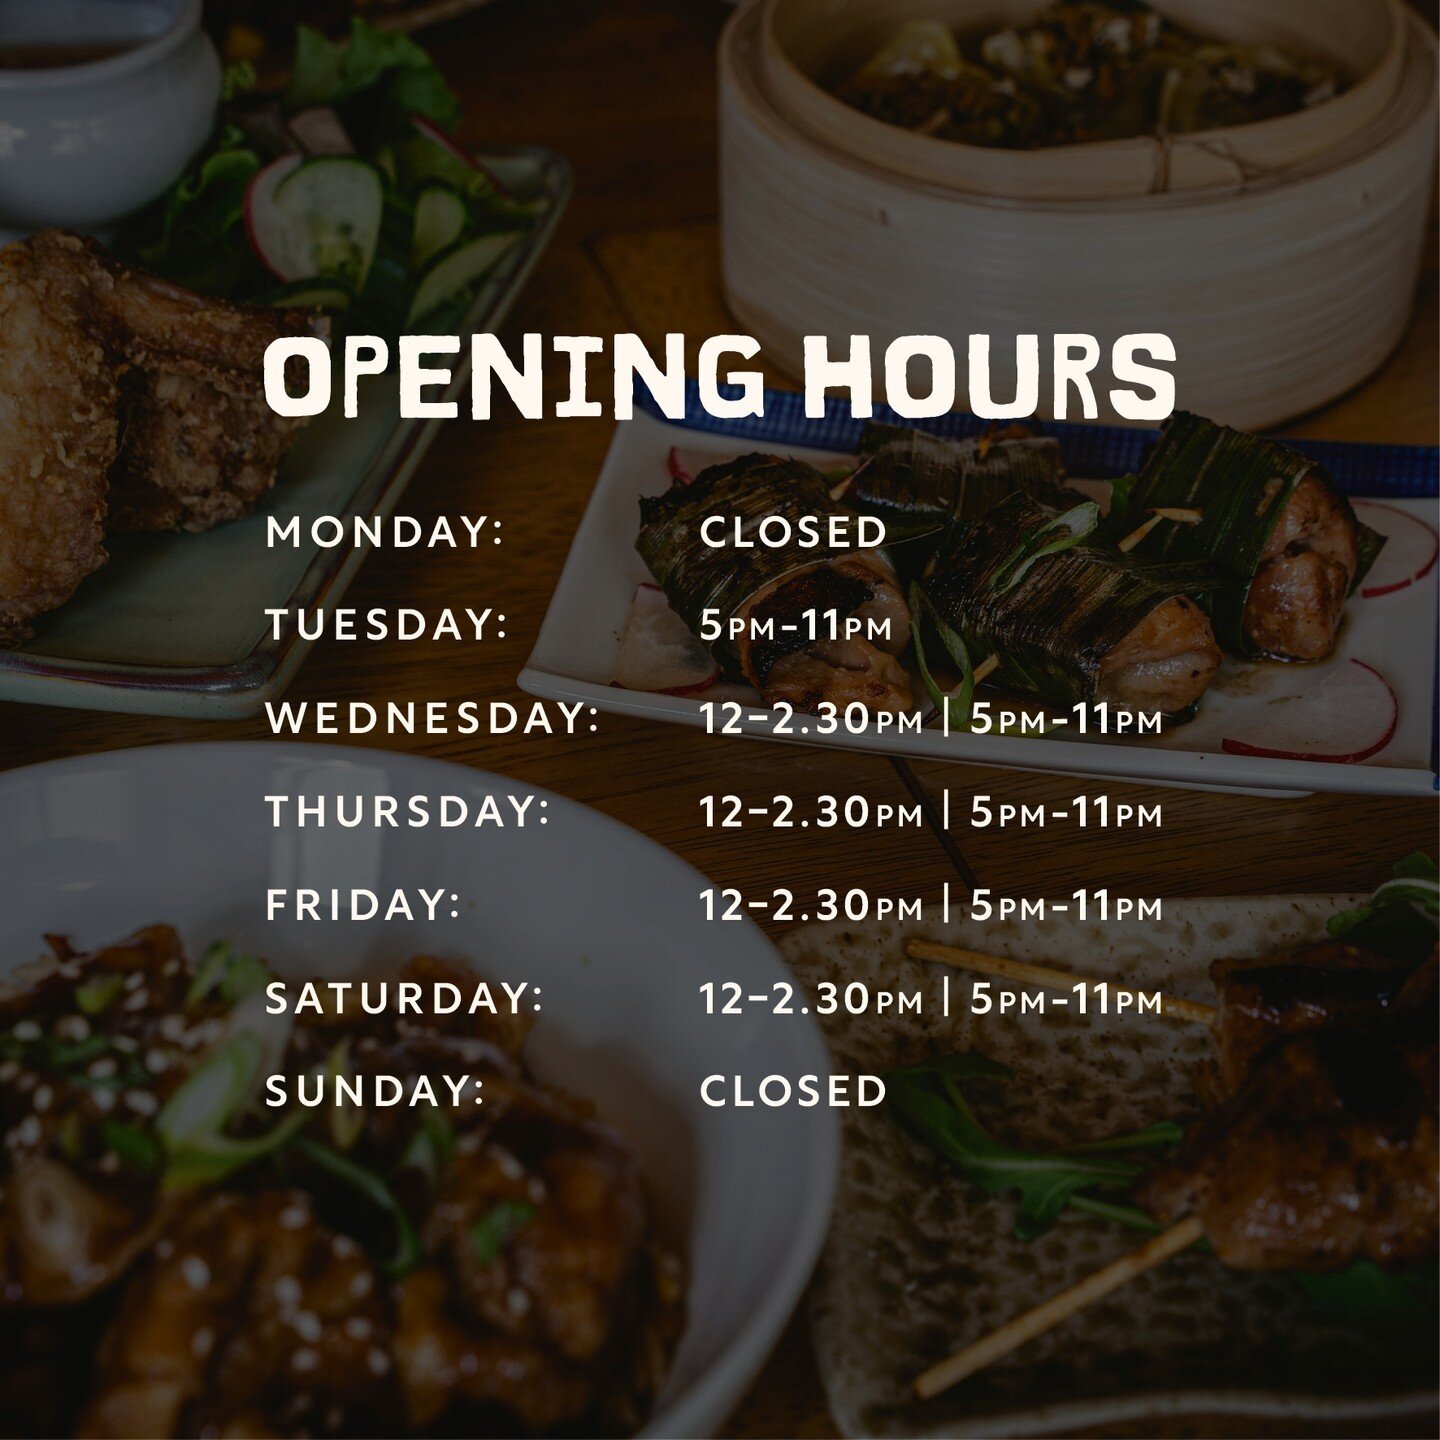 New opening hours! We're now open on Tuesday evenings - give us a call or use our online form to book a table. #tambayankitchen 🇵🇭